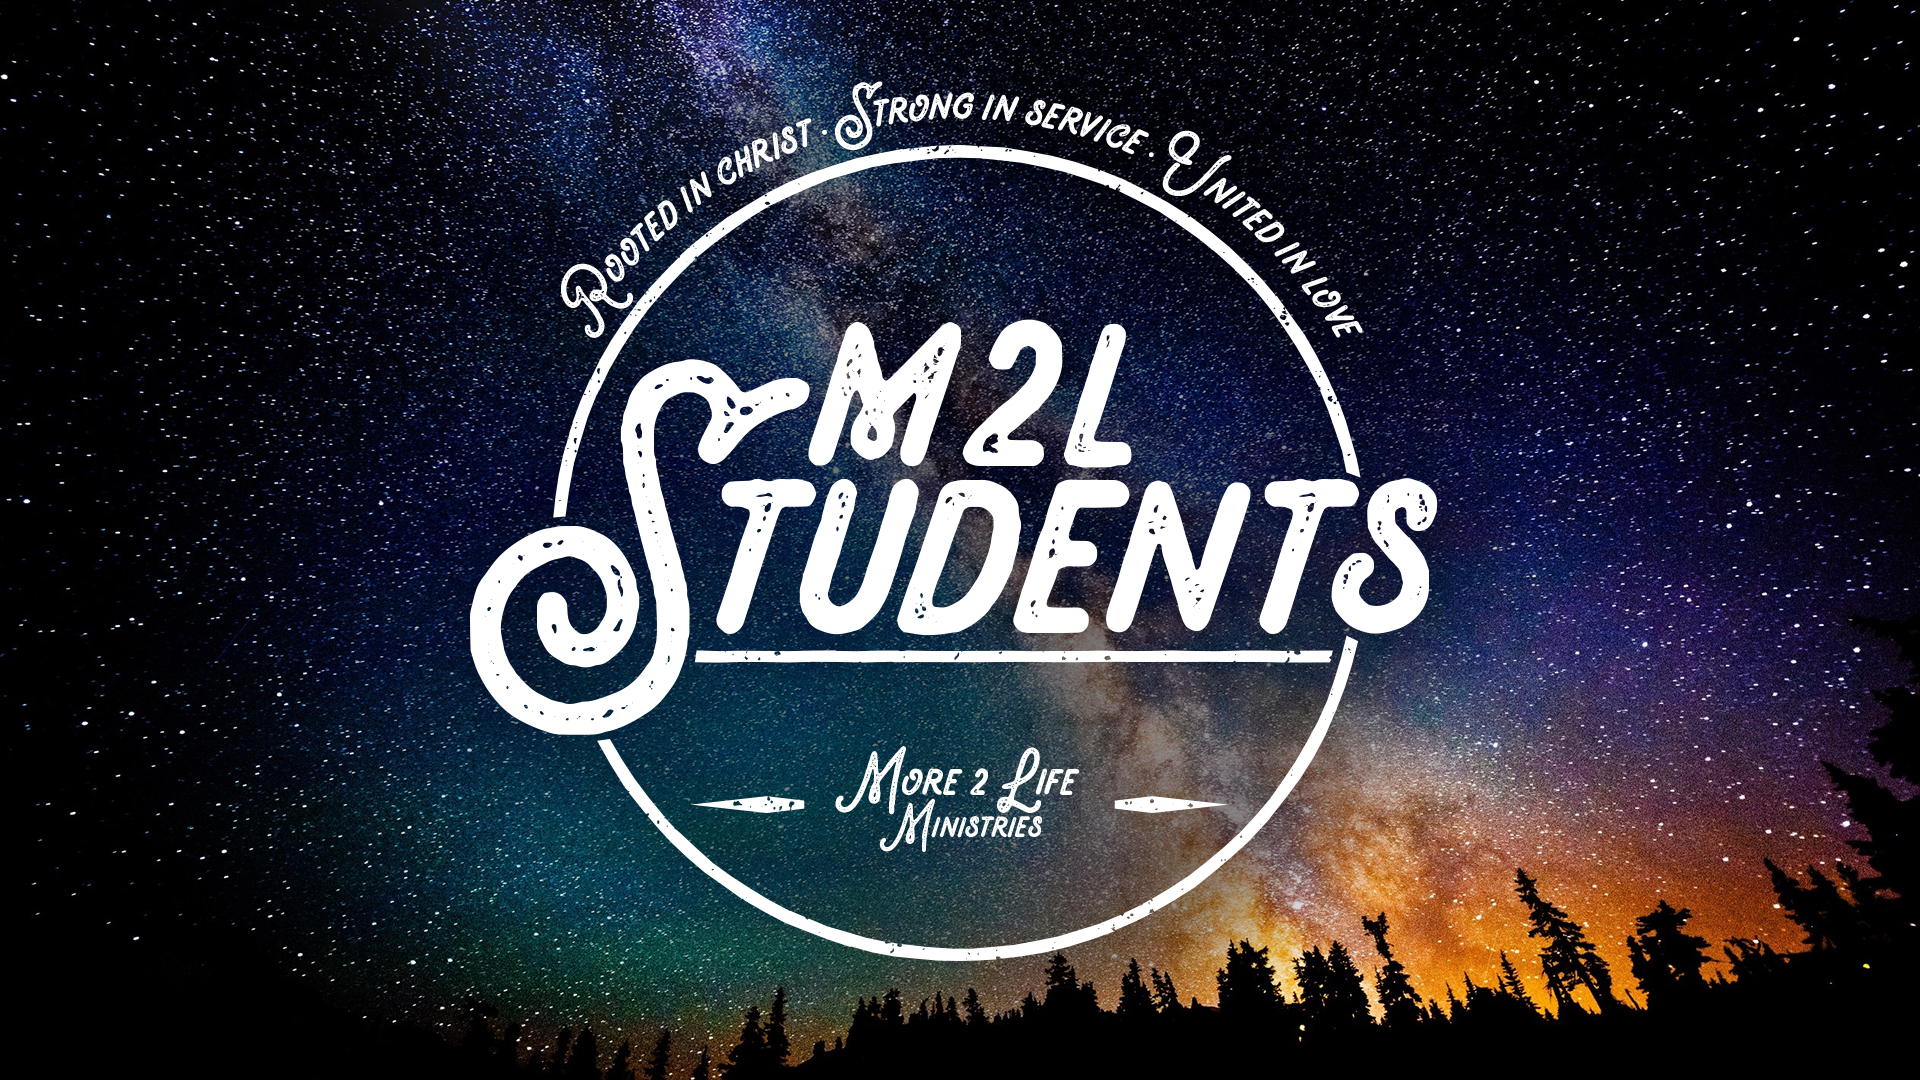 M2L Students — More 2 Life Ministries